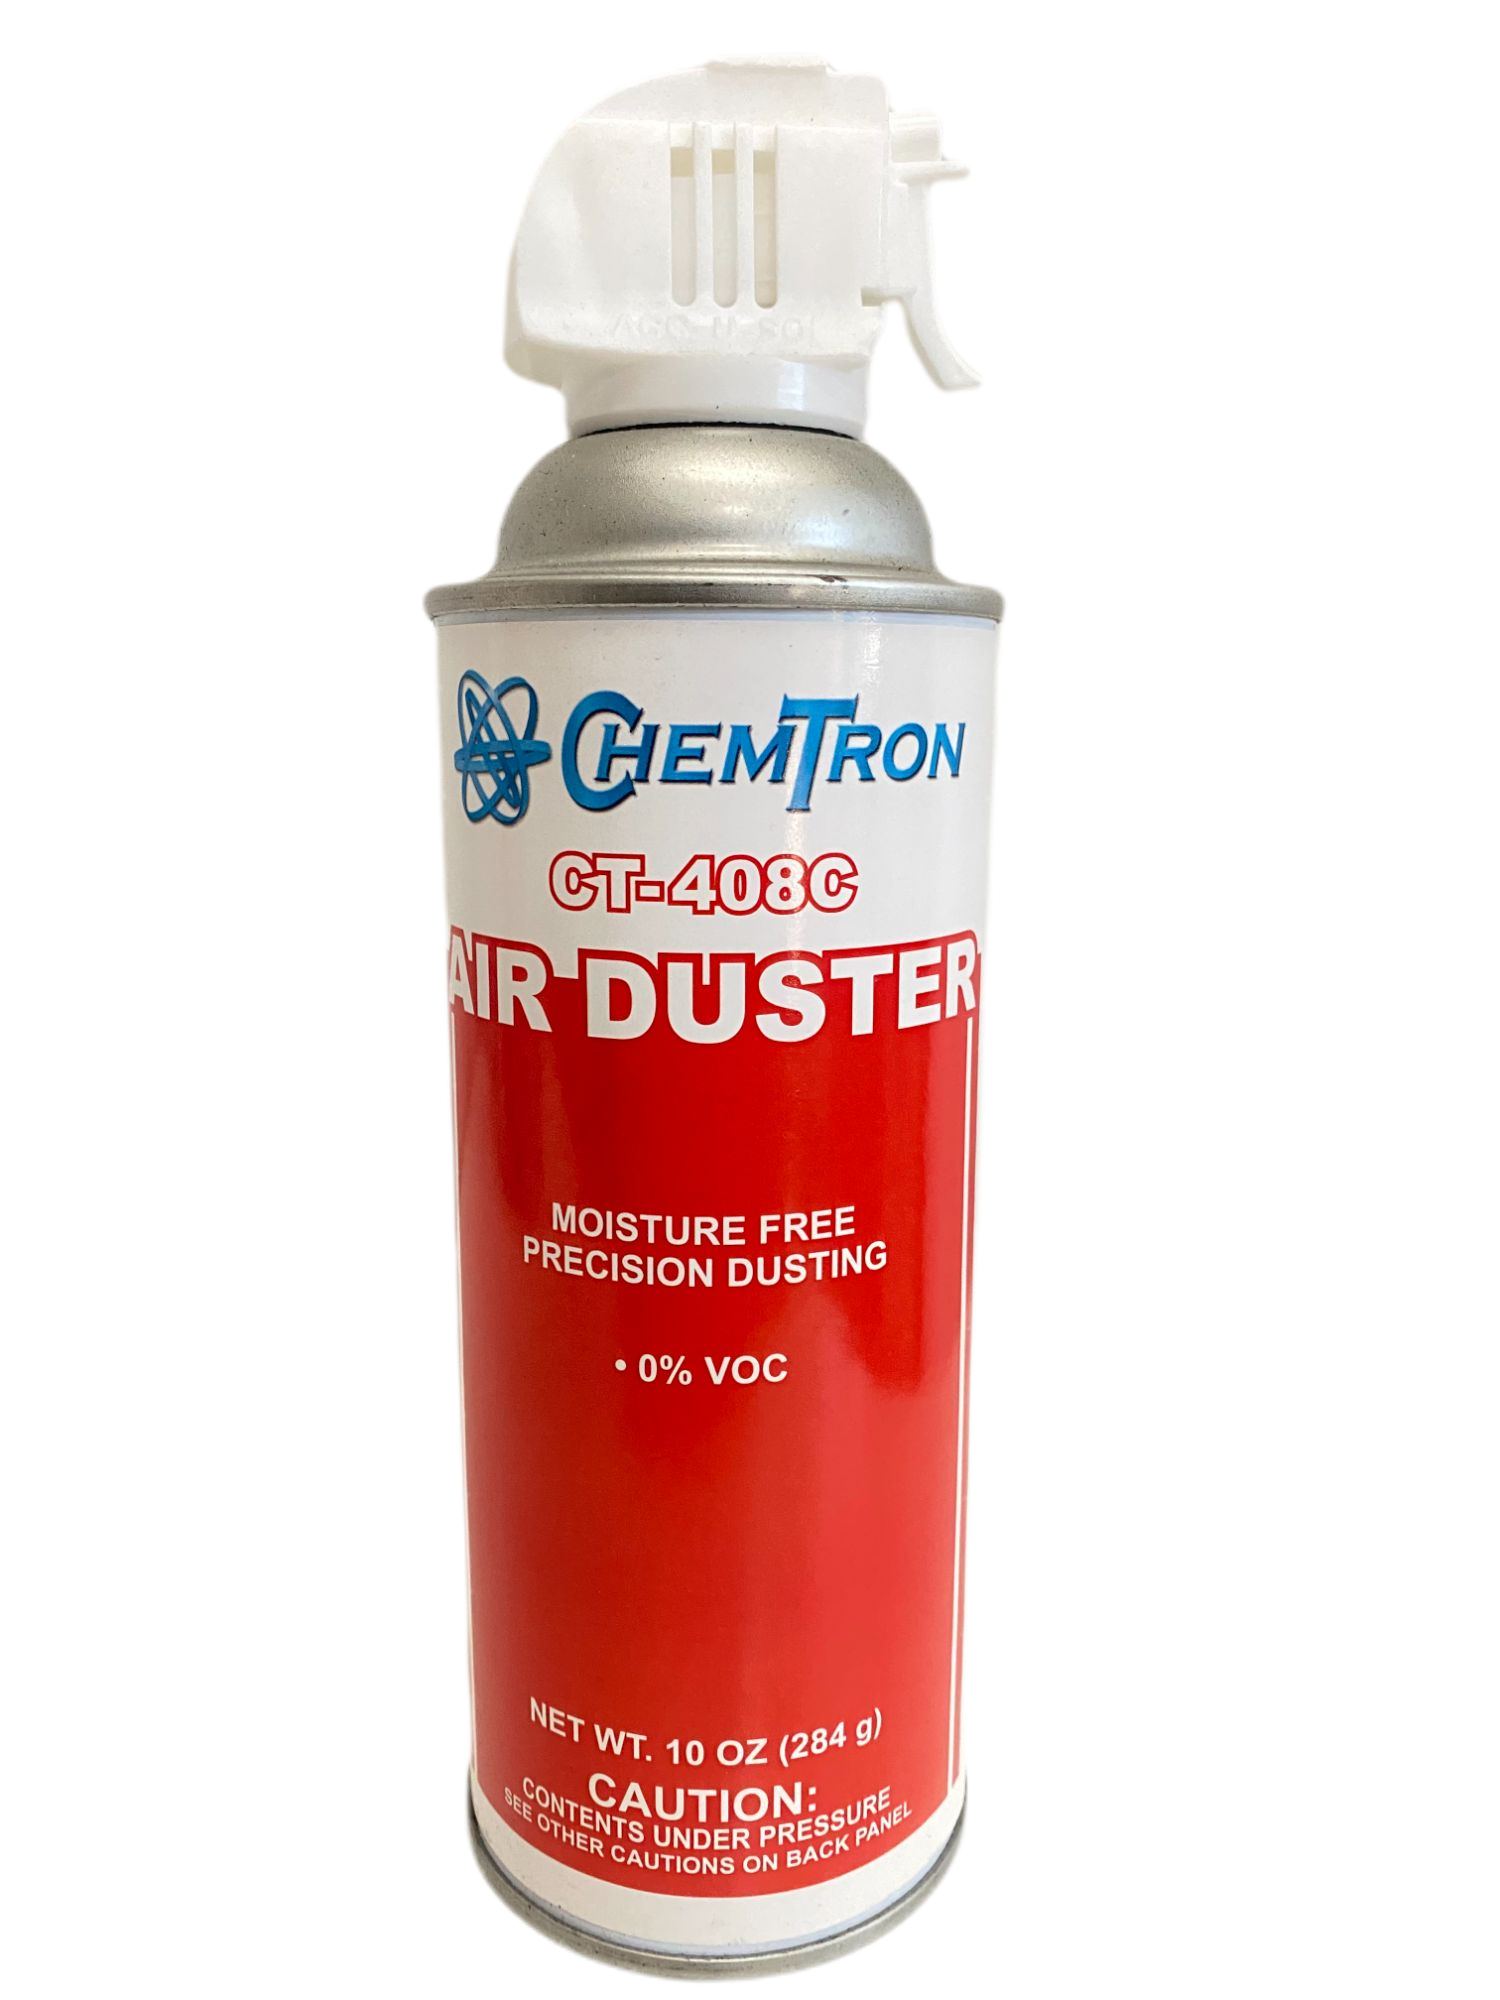 https://www.chemtron.com/wp-content/uploads/2020/05/Air-Duster.png